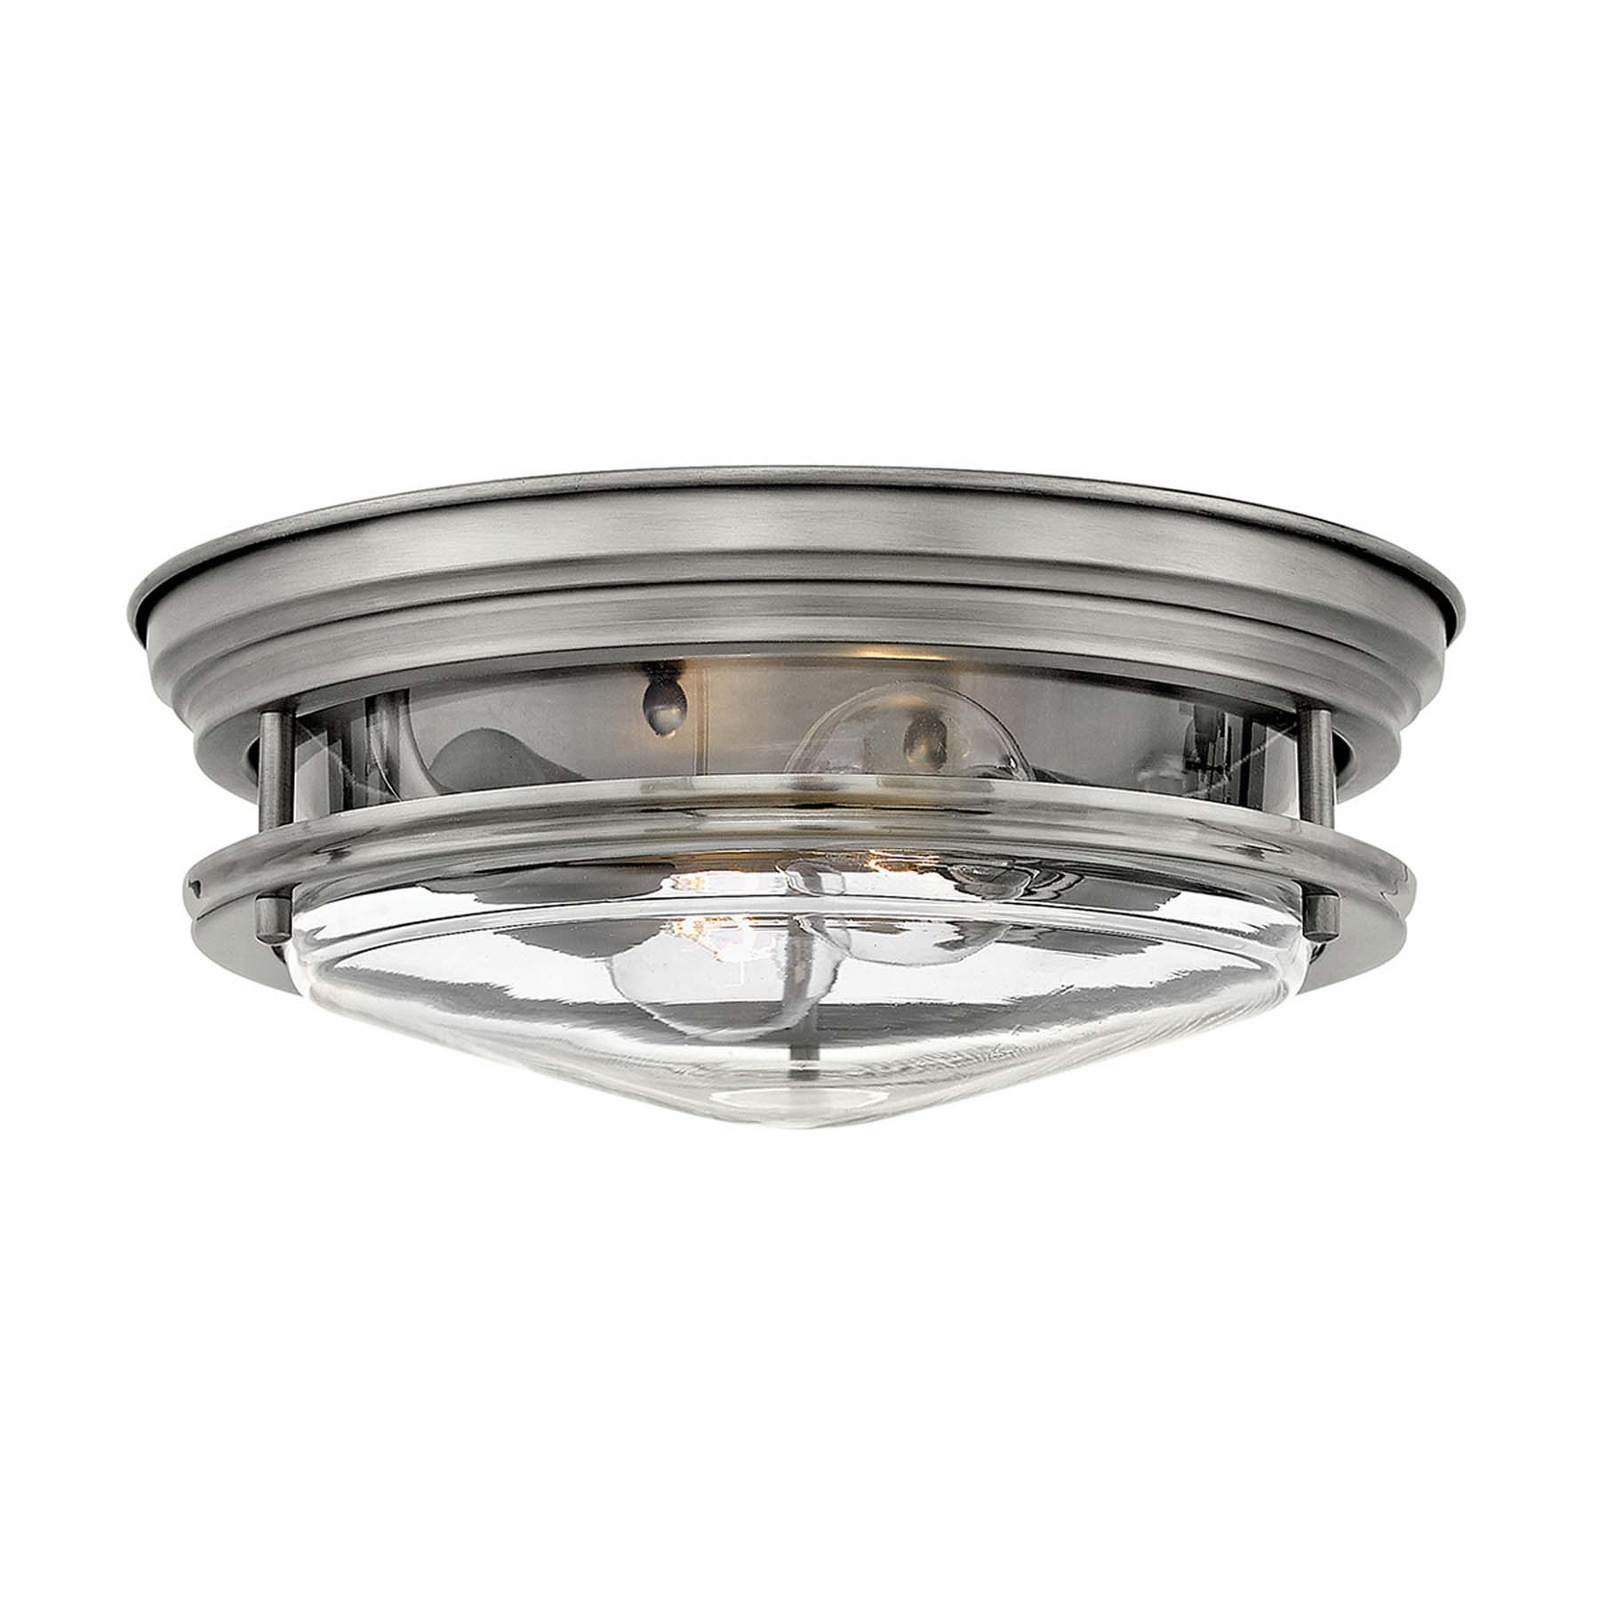 Hadrian outdoor ceiling light, antique nickel/clear